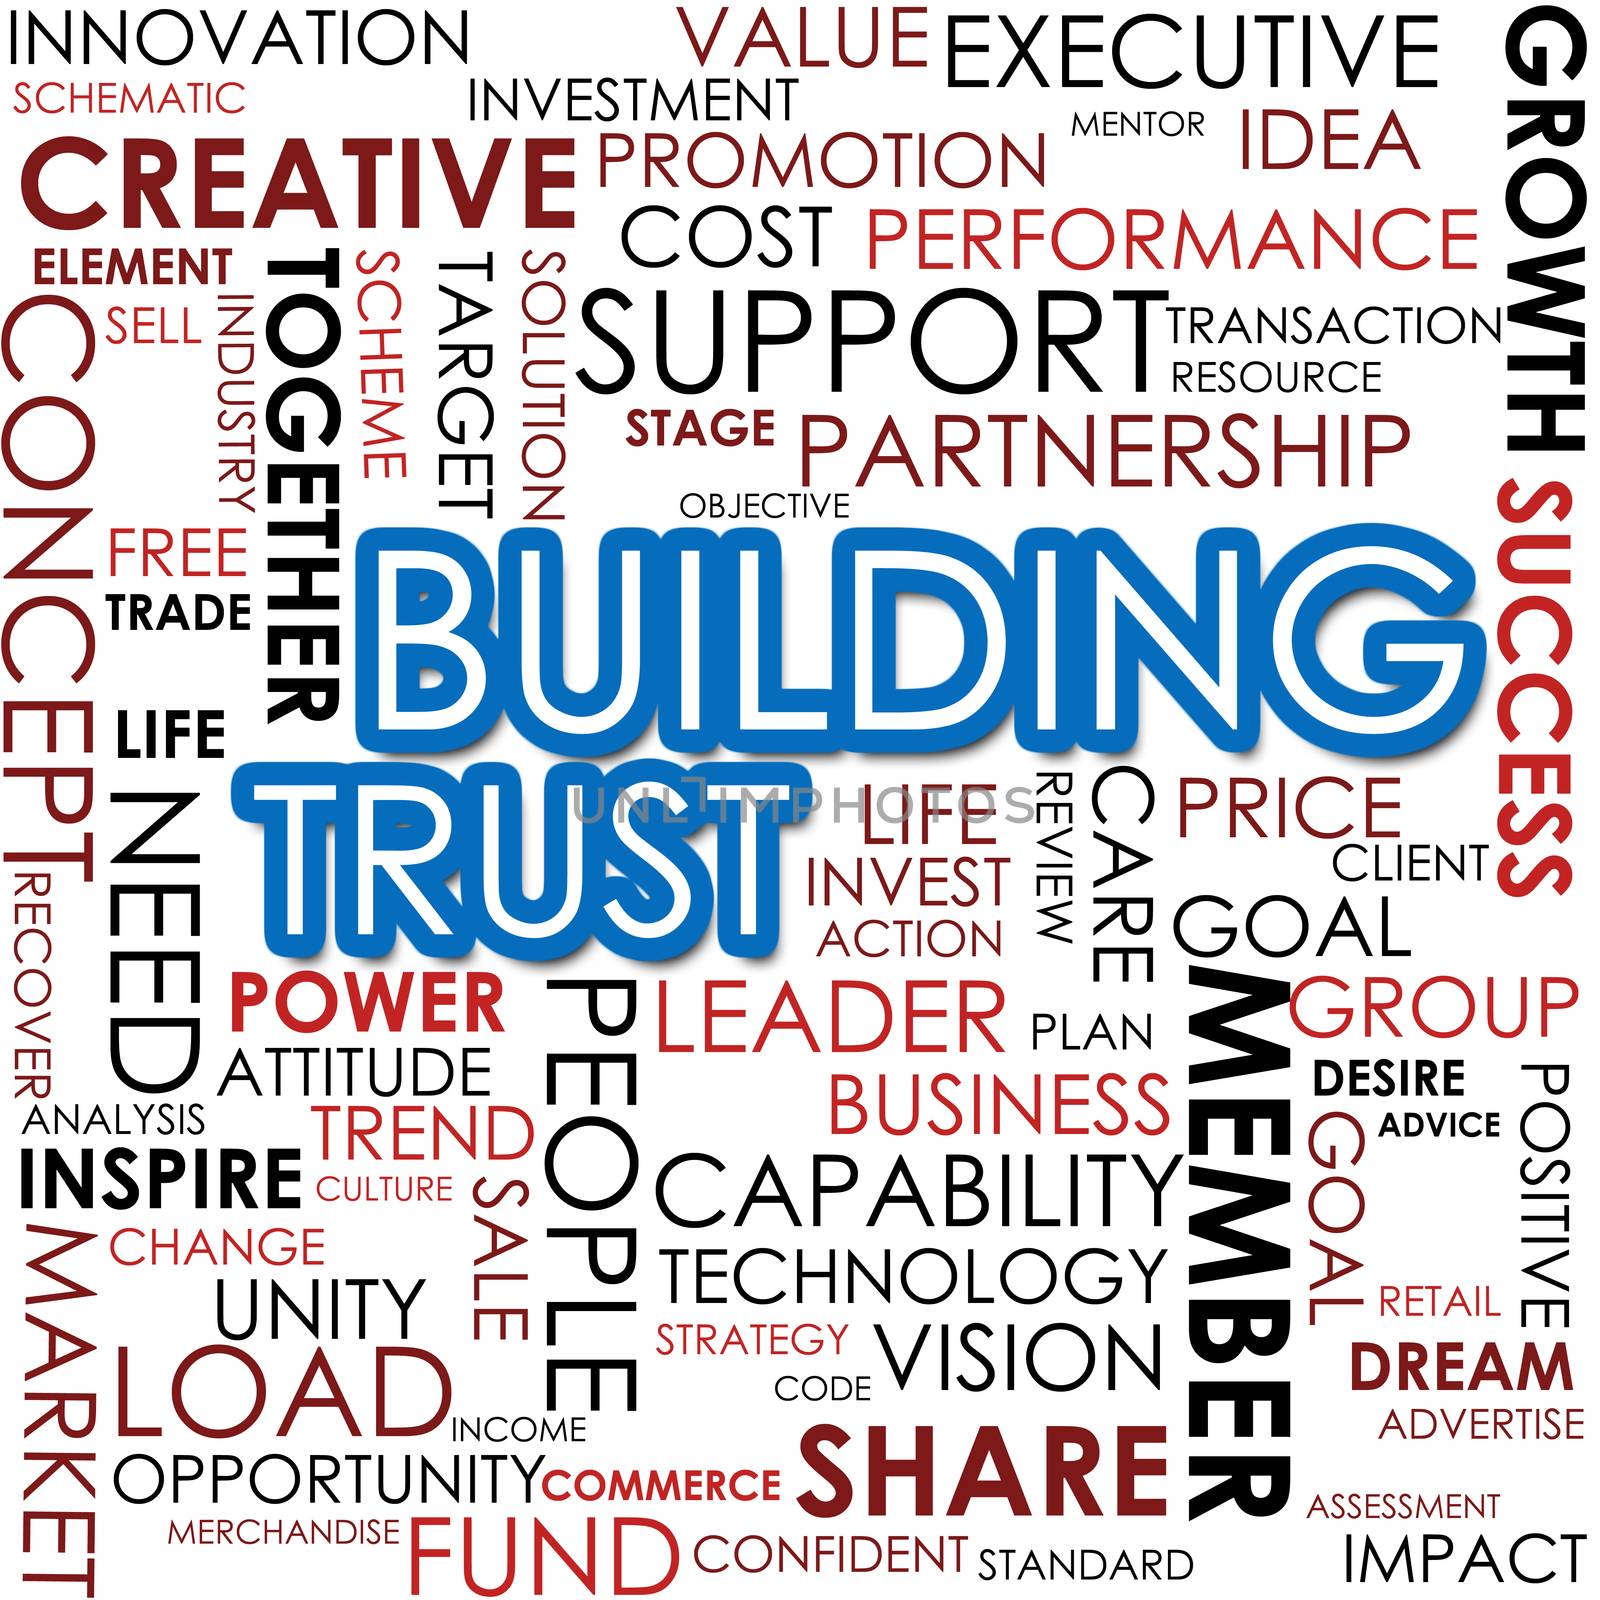 Building trust word cloud by tang90246